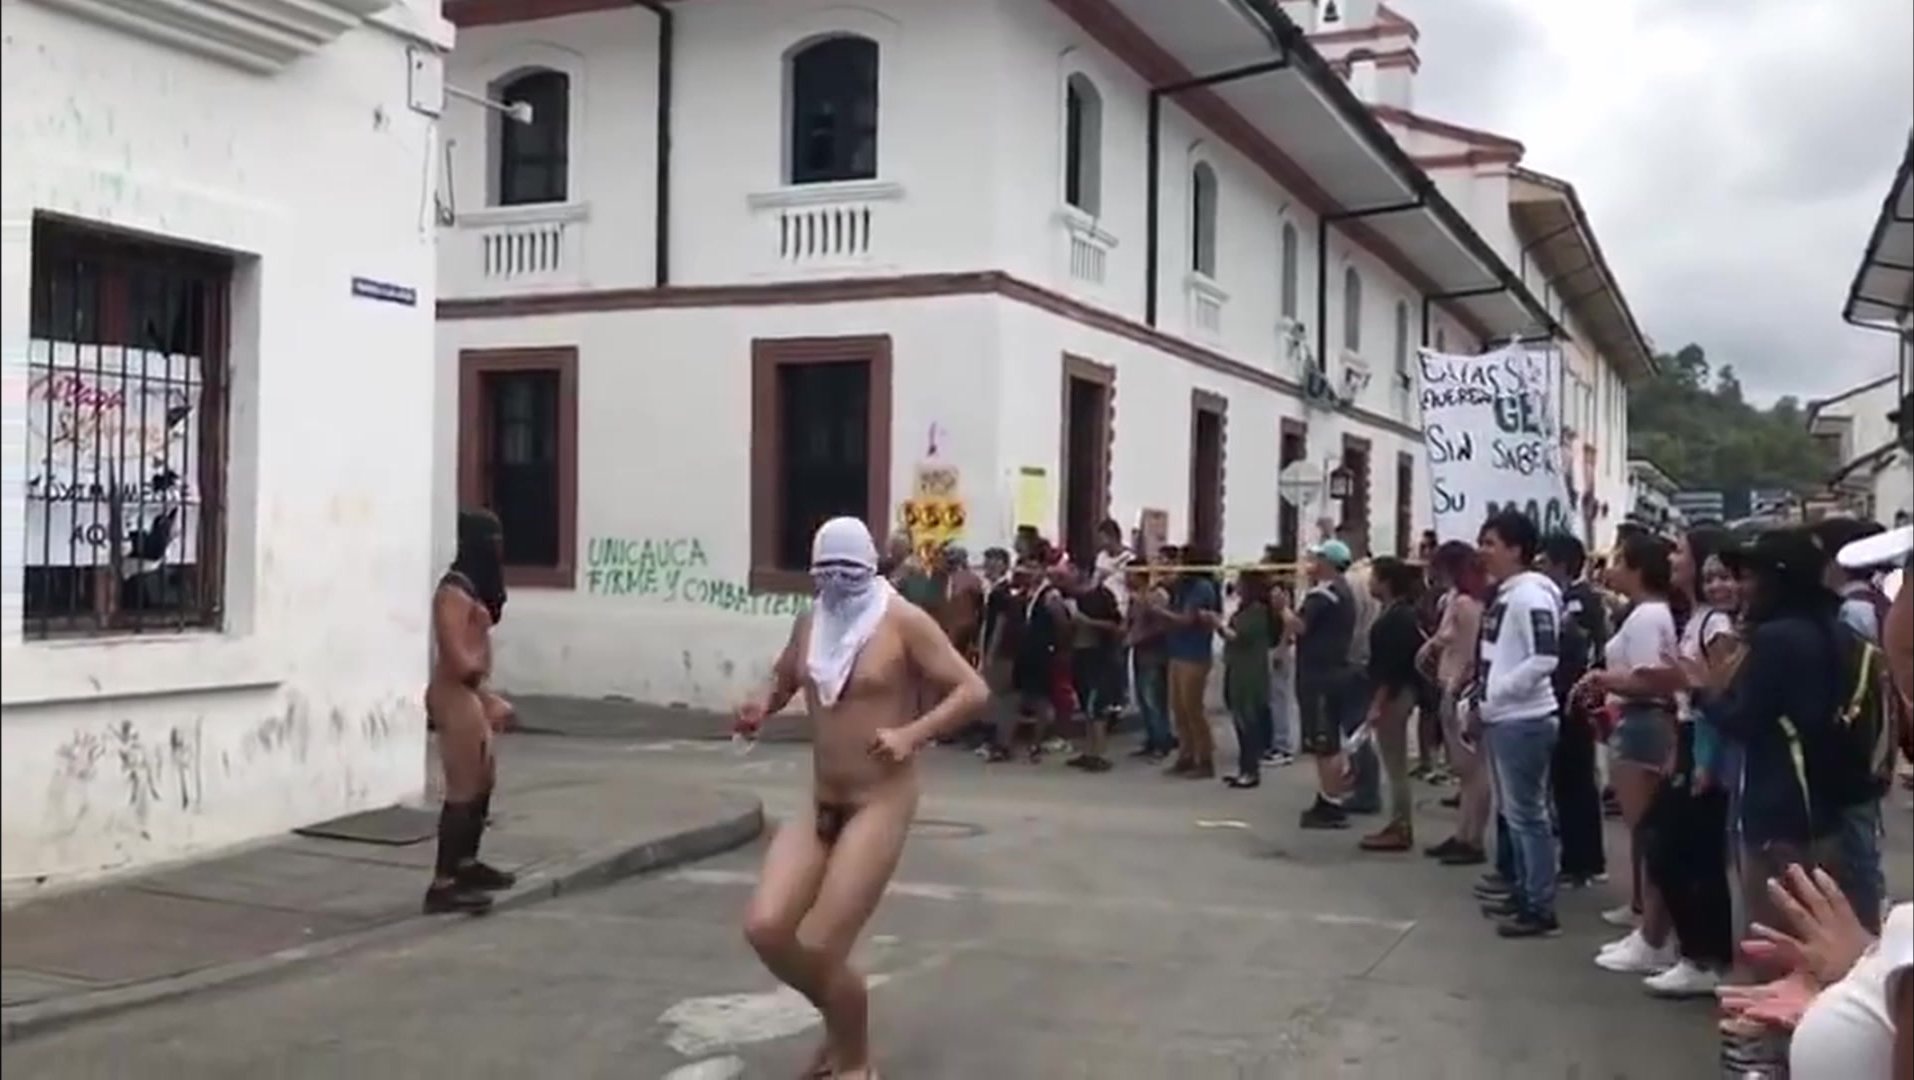 Young guys naked student protest